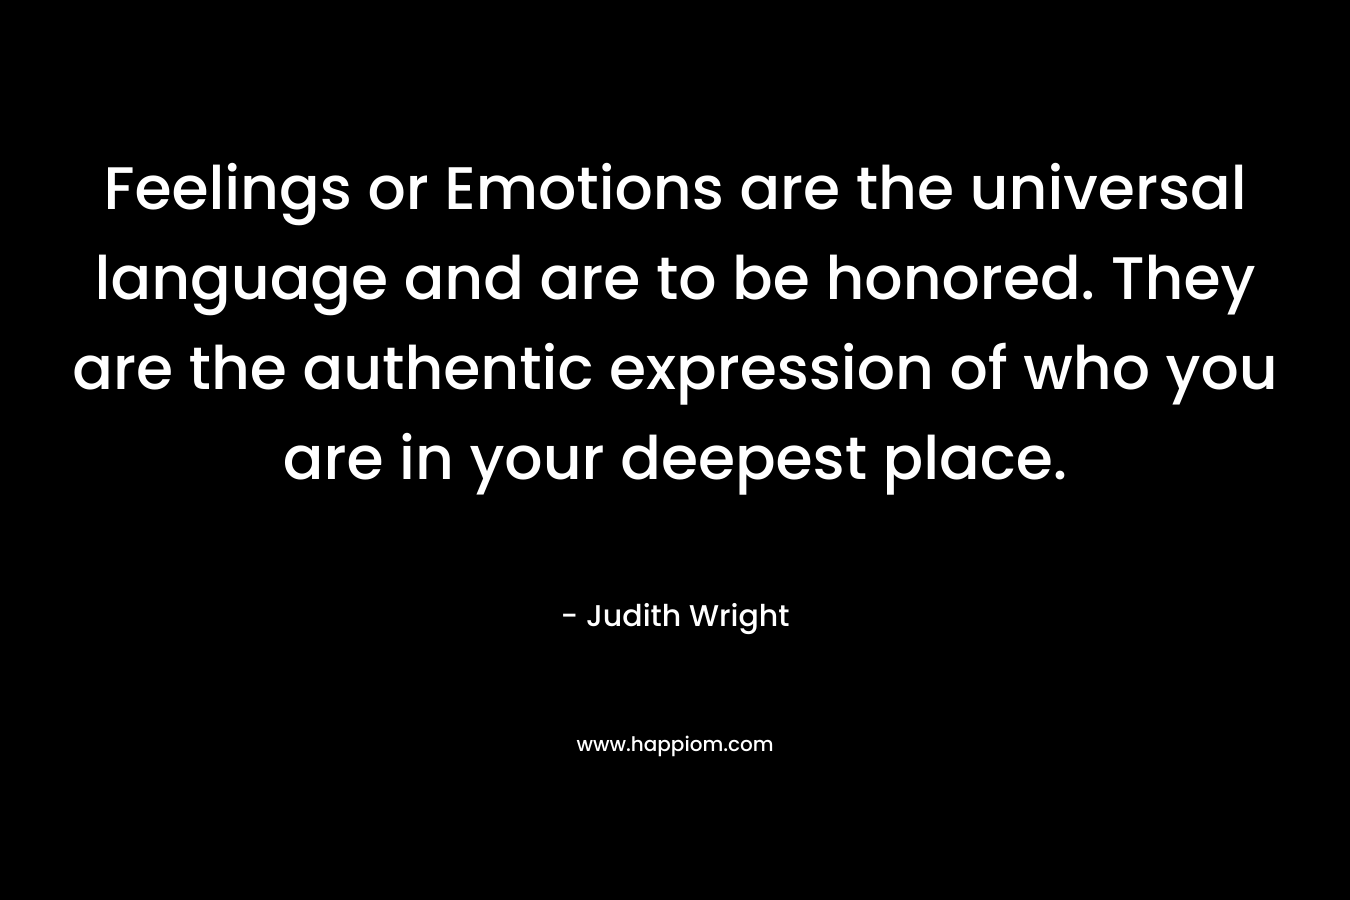 Feelings or Emotions are the universal language and are to be honored. They are the authentic expression of who you are in your deepest place.